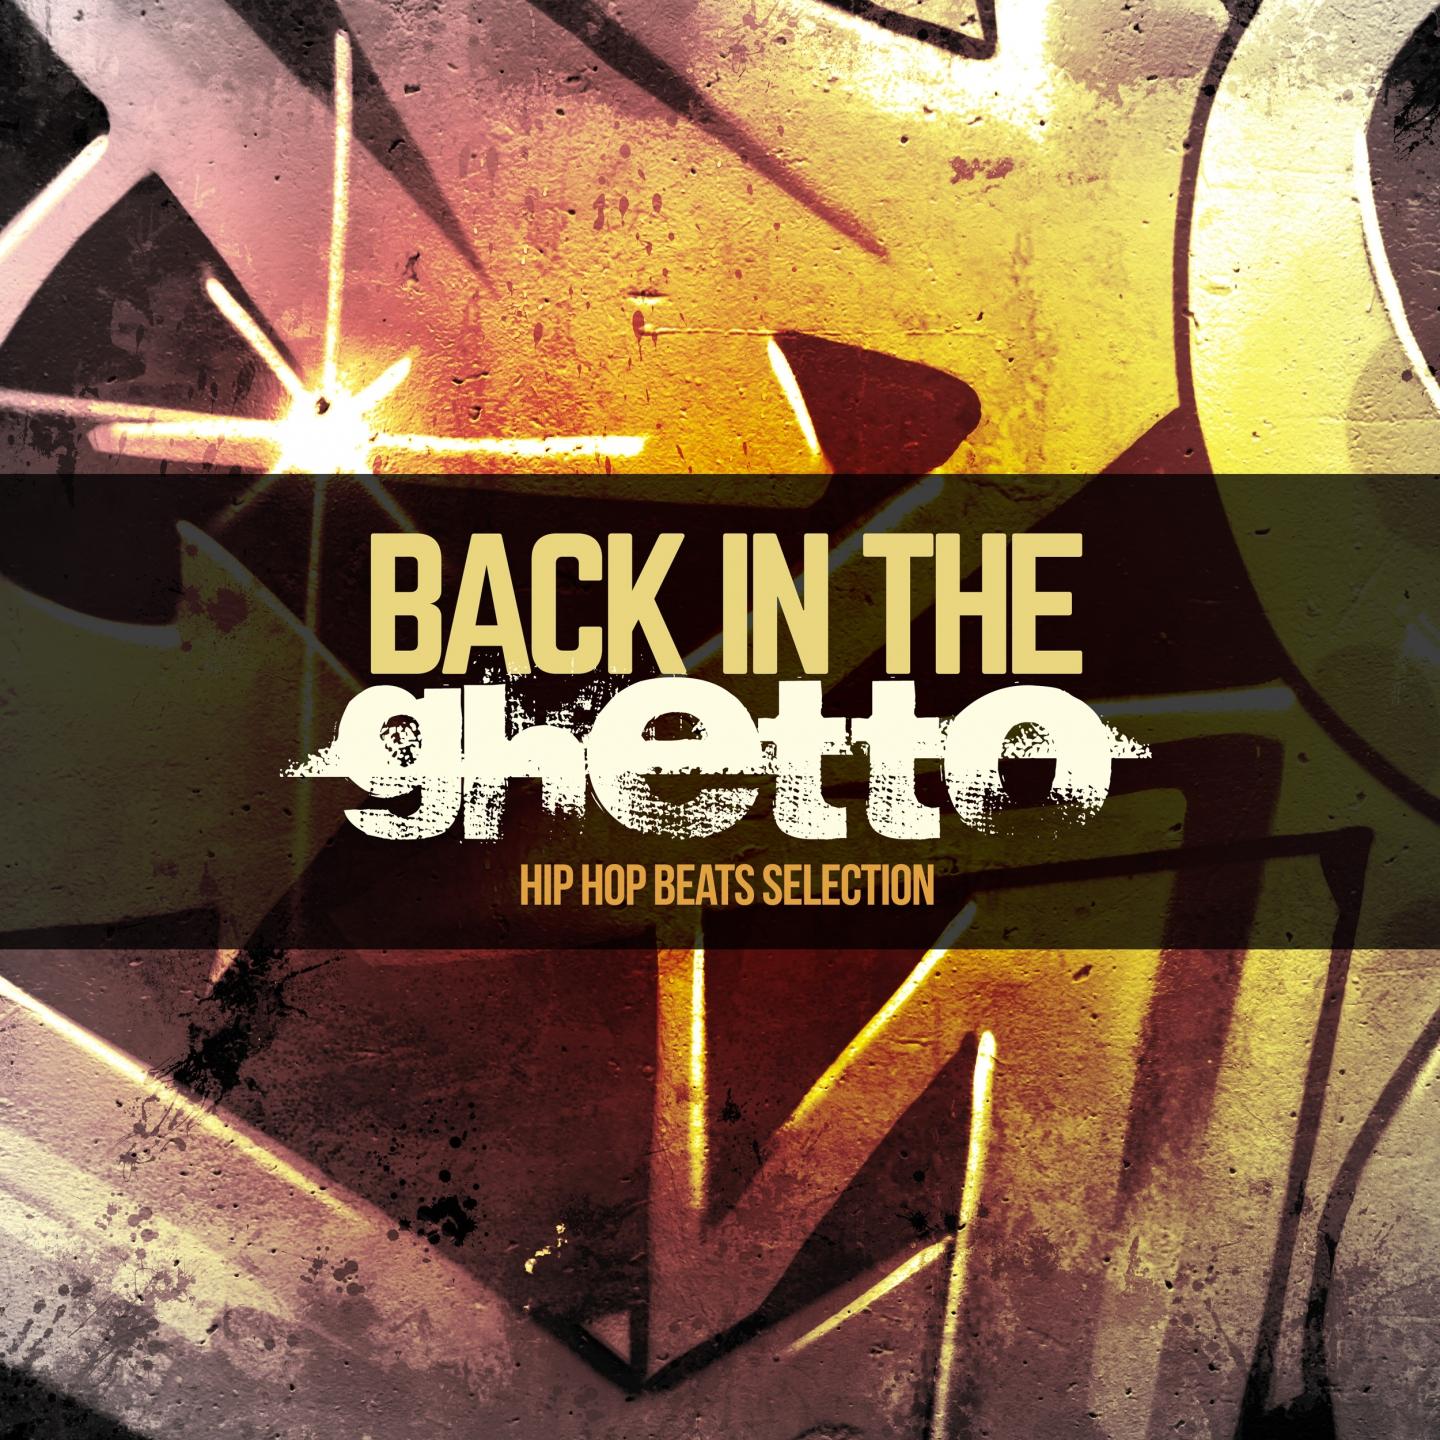 Back in the Ghetto (Hip Hop Beats Selection)